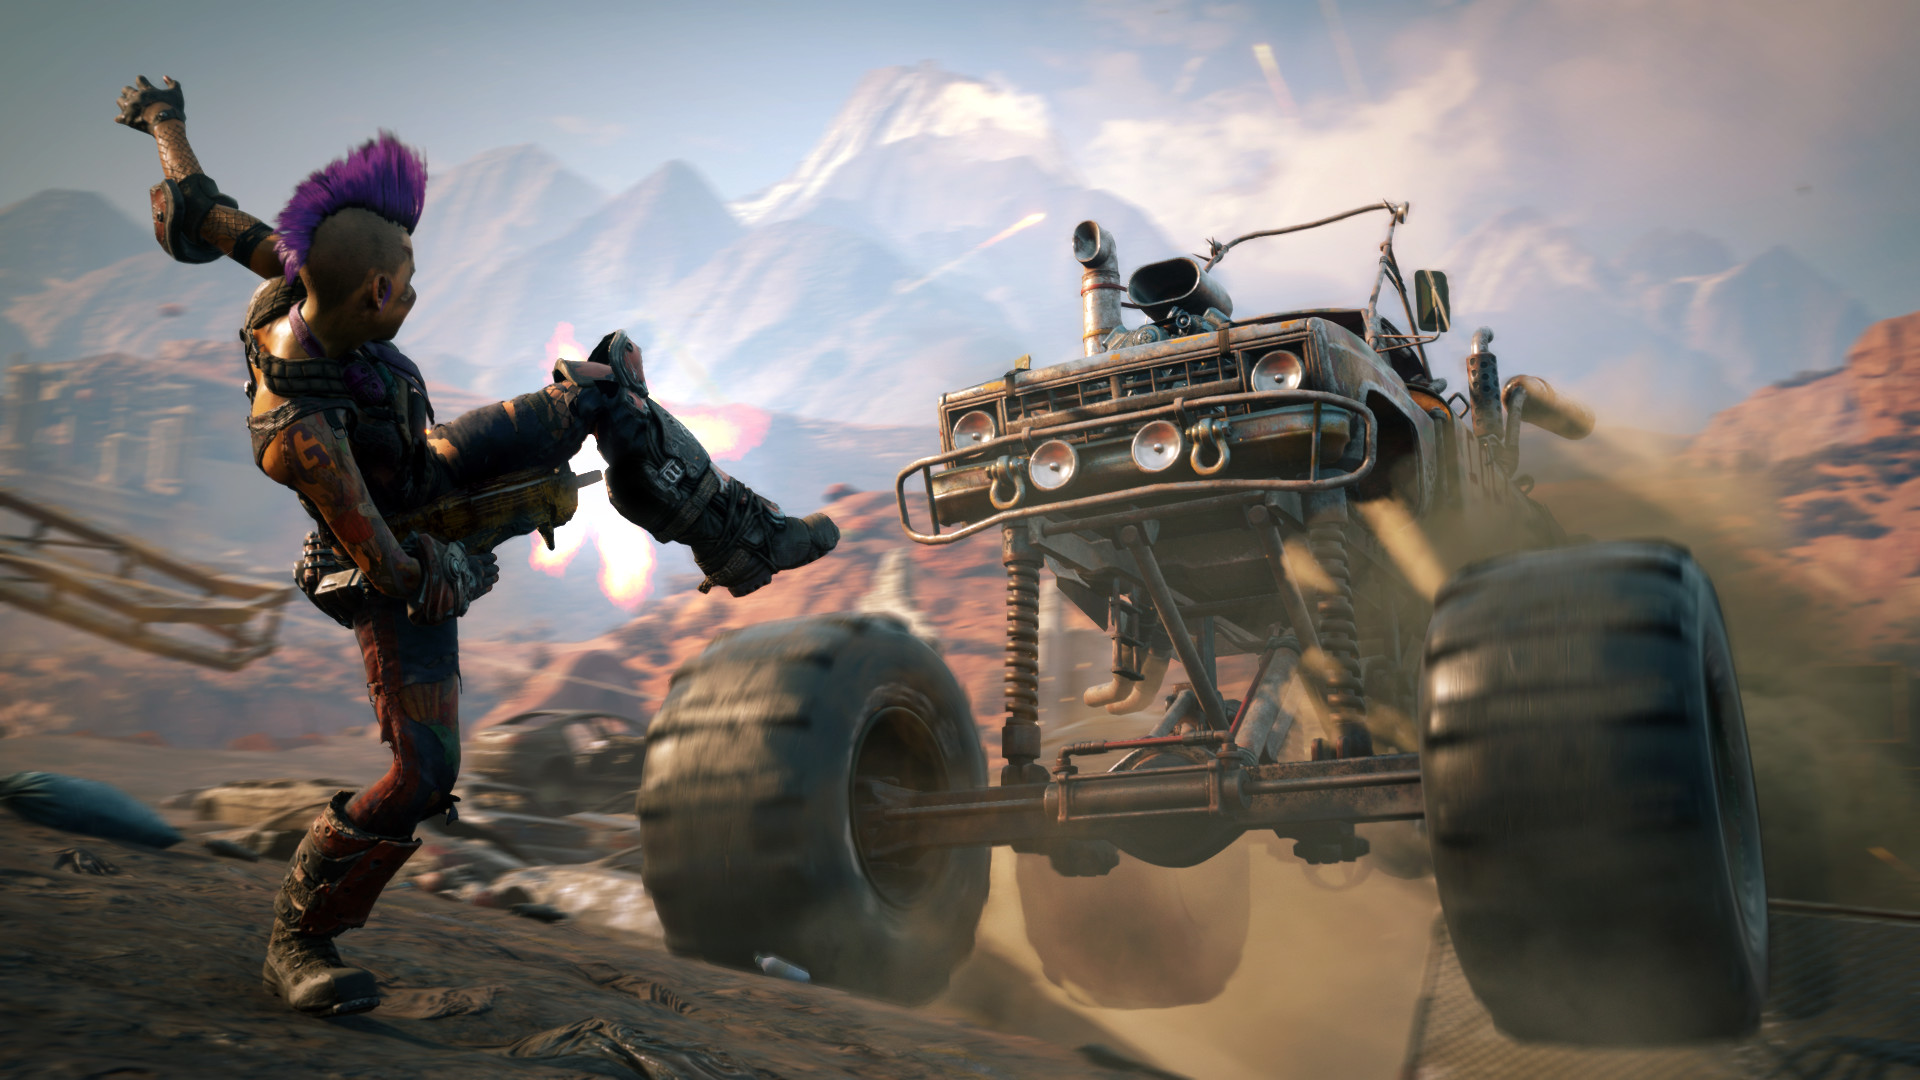 RAGE 2 - Deluxe Edition Pack DLC Steam CD Key 10.16 $